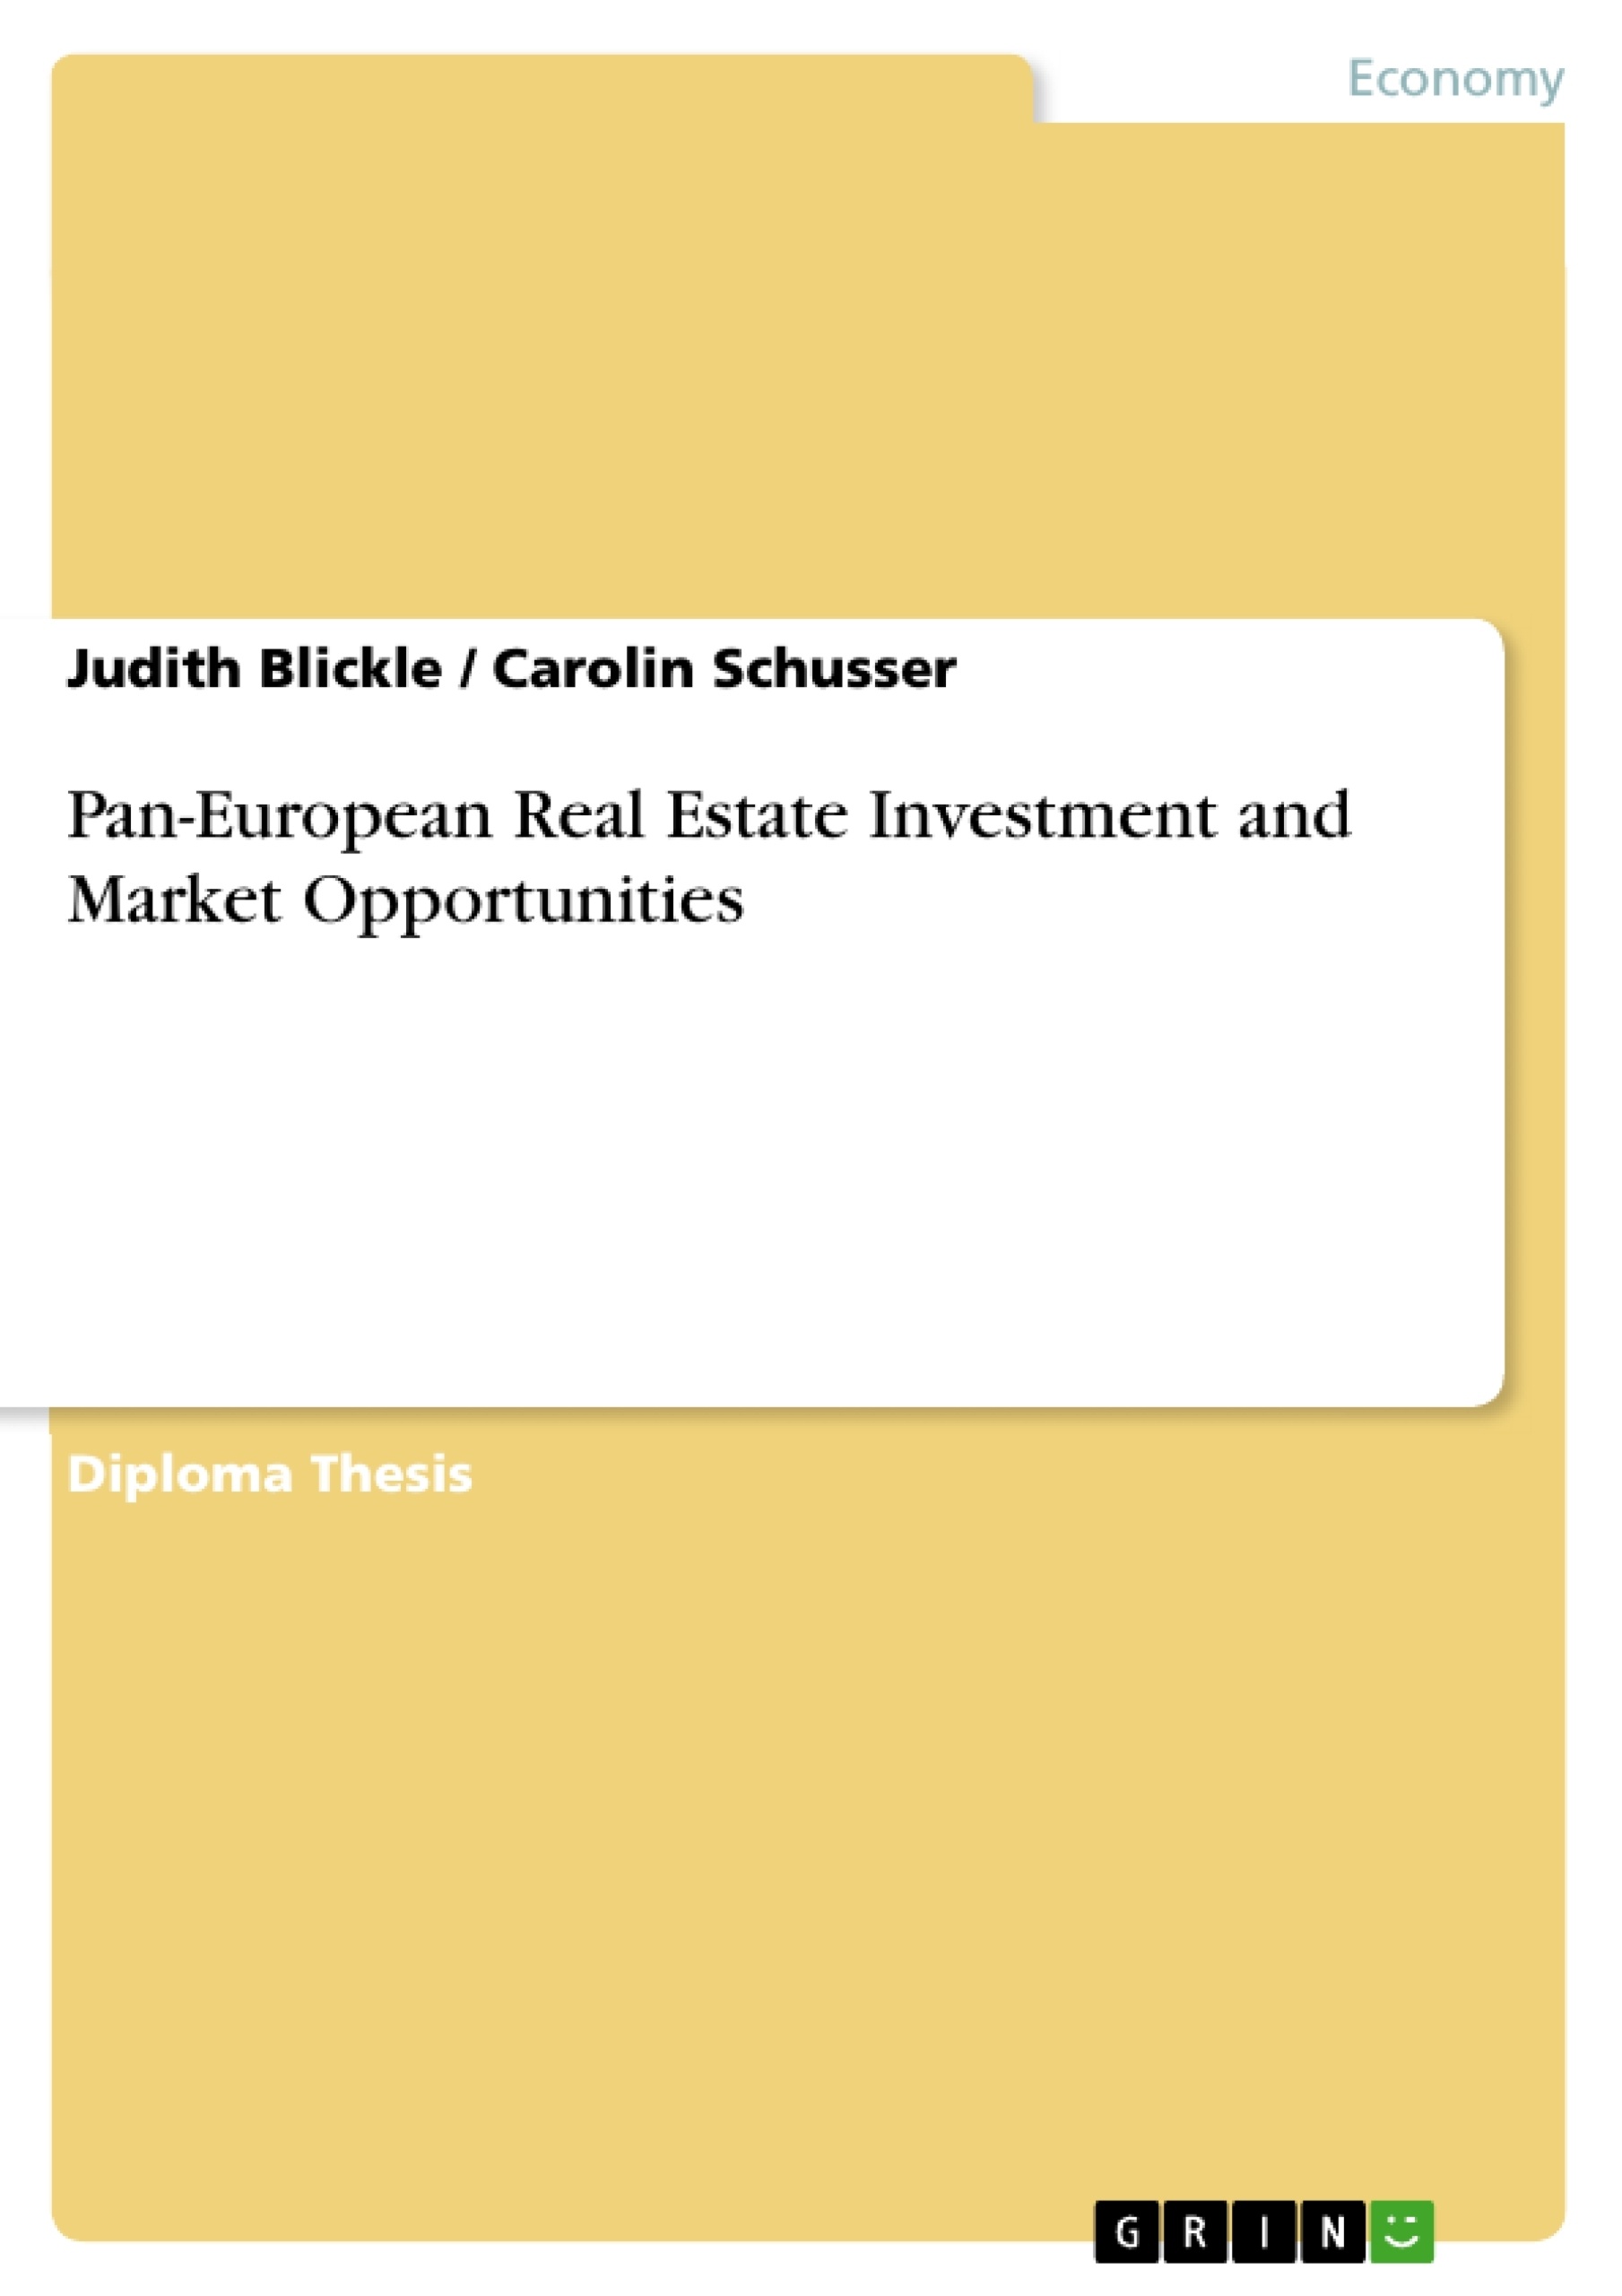 Title: Pan-European Real Estate Investment and Market Opportunities